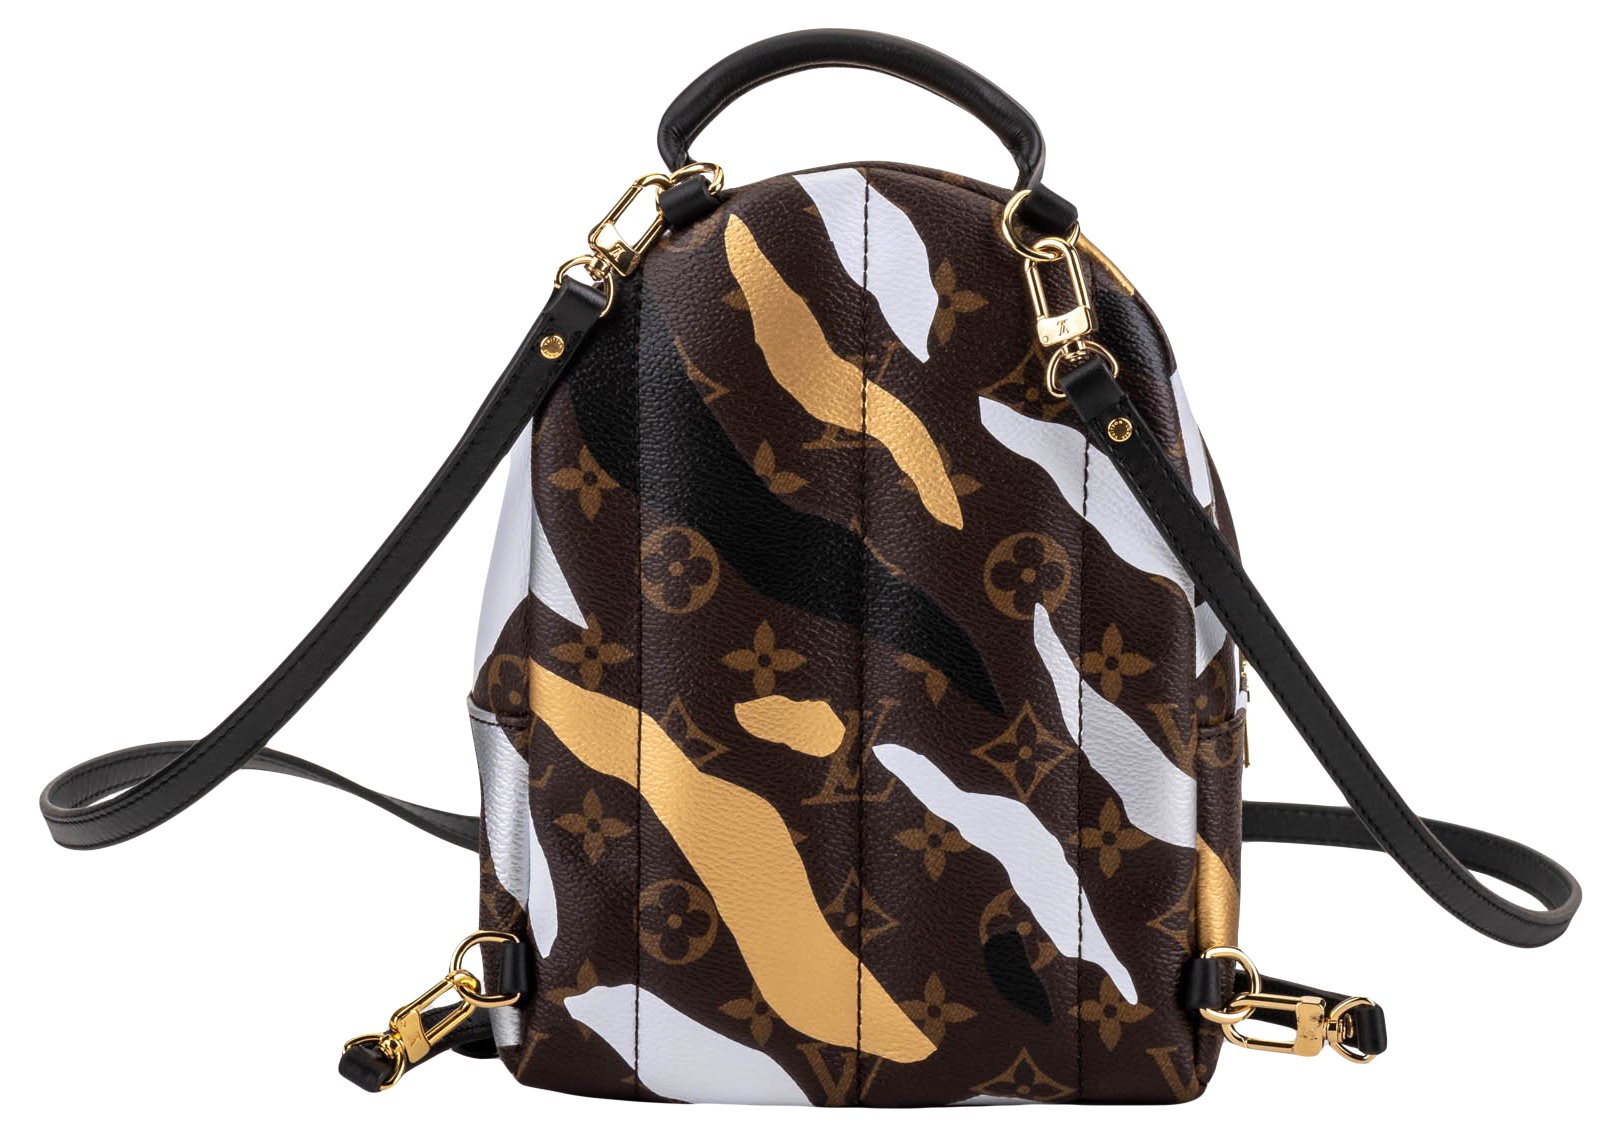 The Louis Vuitton Backpack Is Back